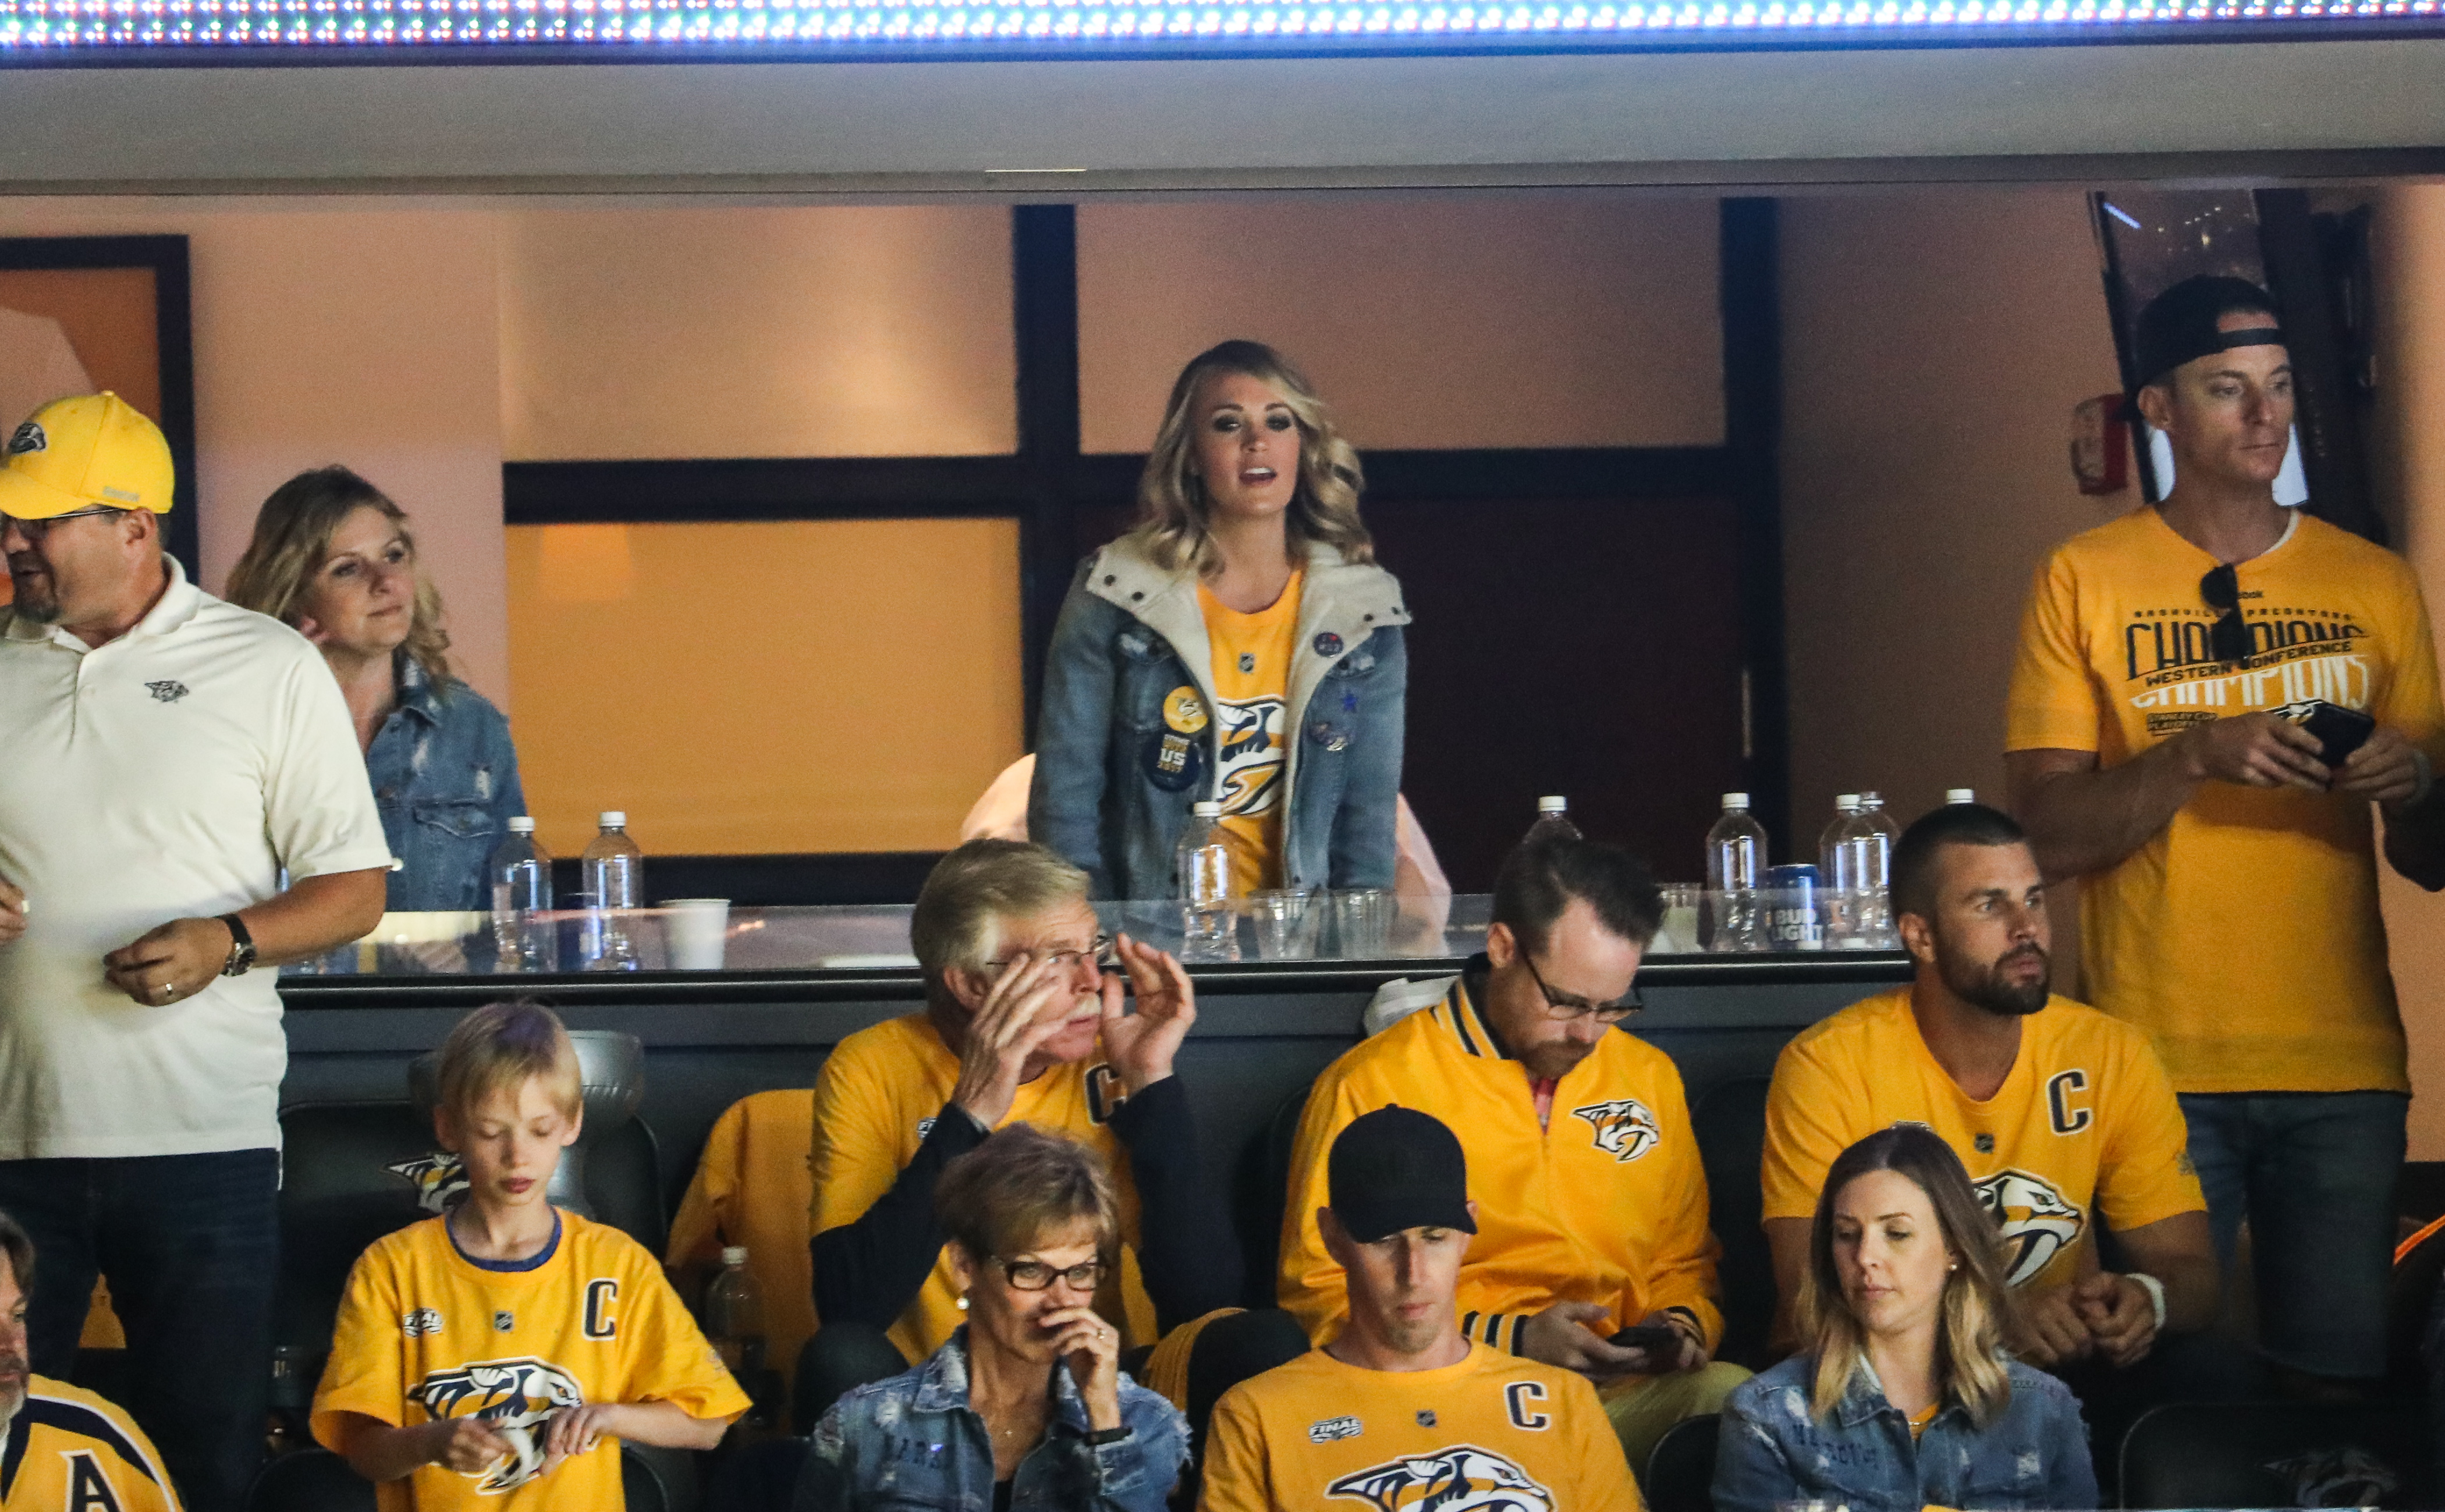 Nashville Predators on X: Our friends at @texasroadhouse are